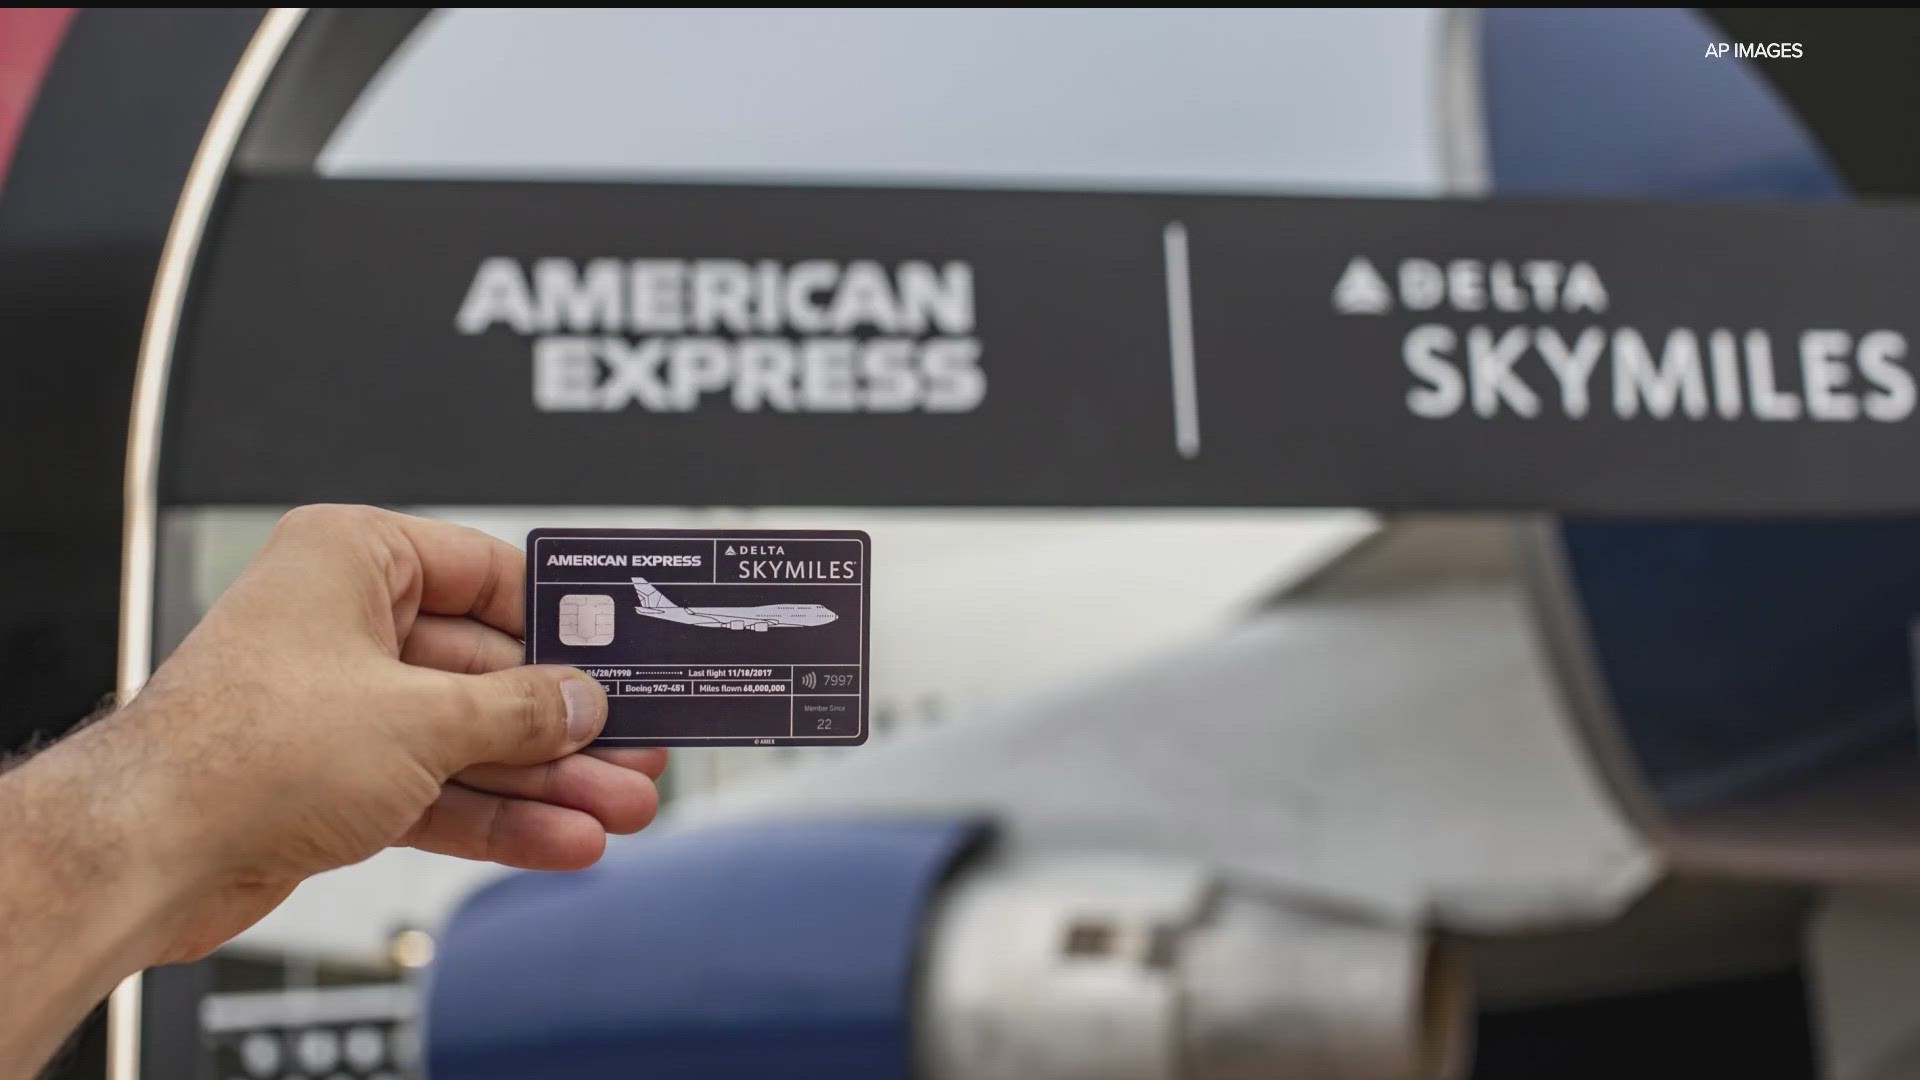 Kyle Potter, executive editor with Thrifty Traveler, explains that any changes with Delta are typically made because of its relationship with American Express.